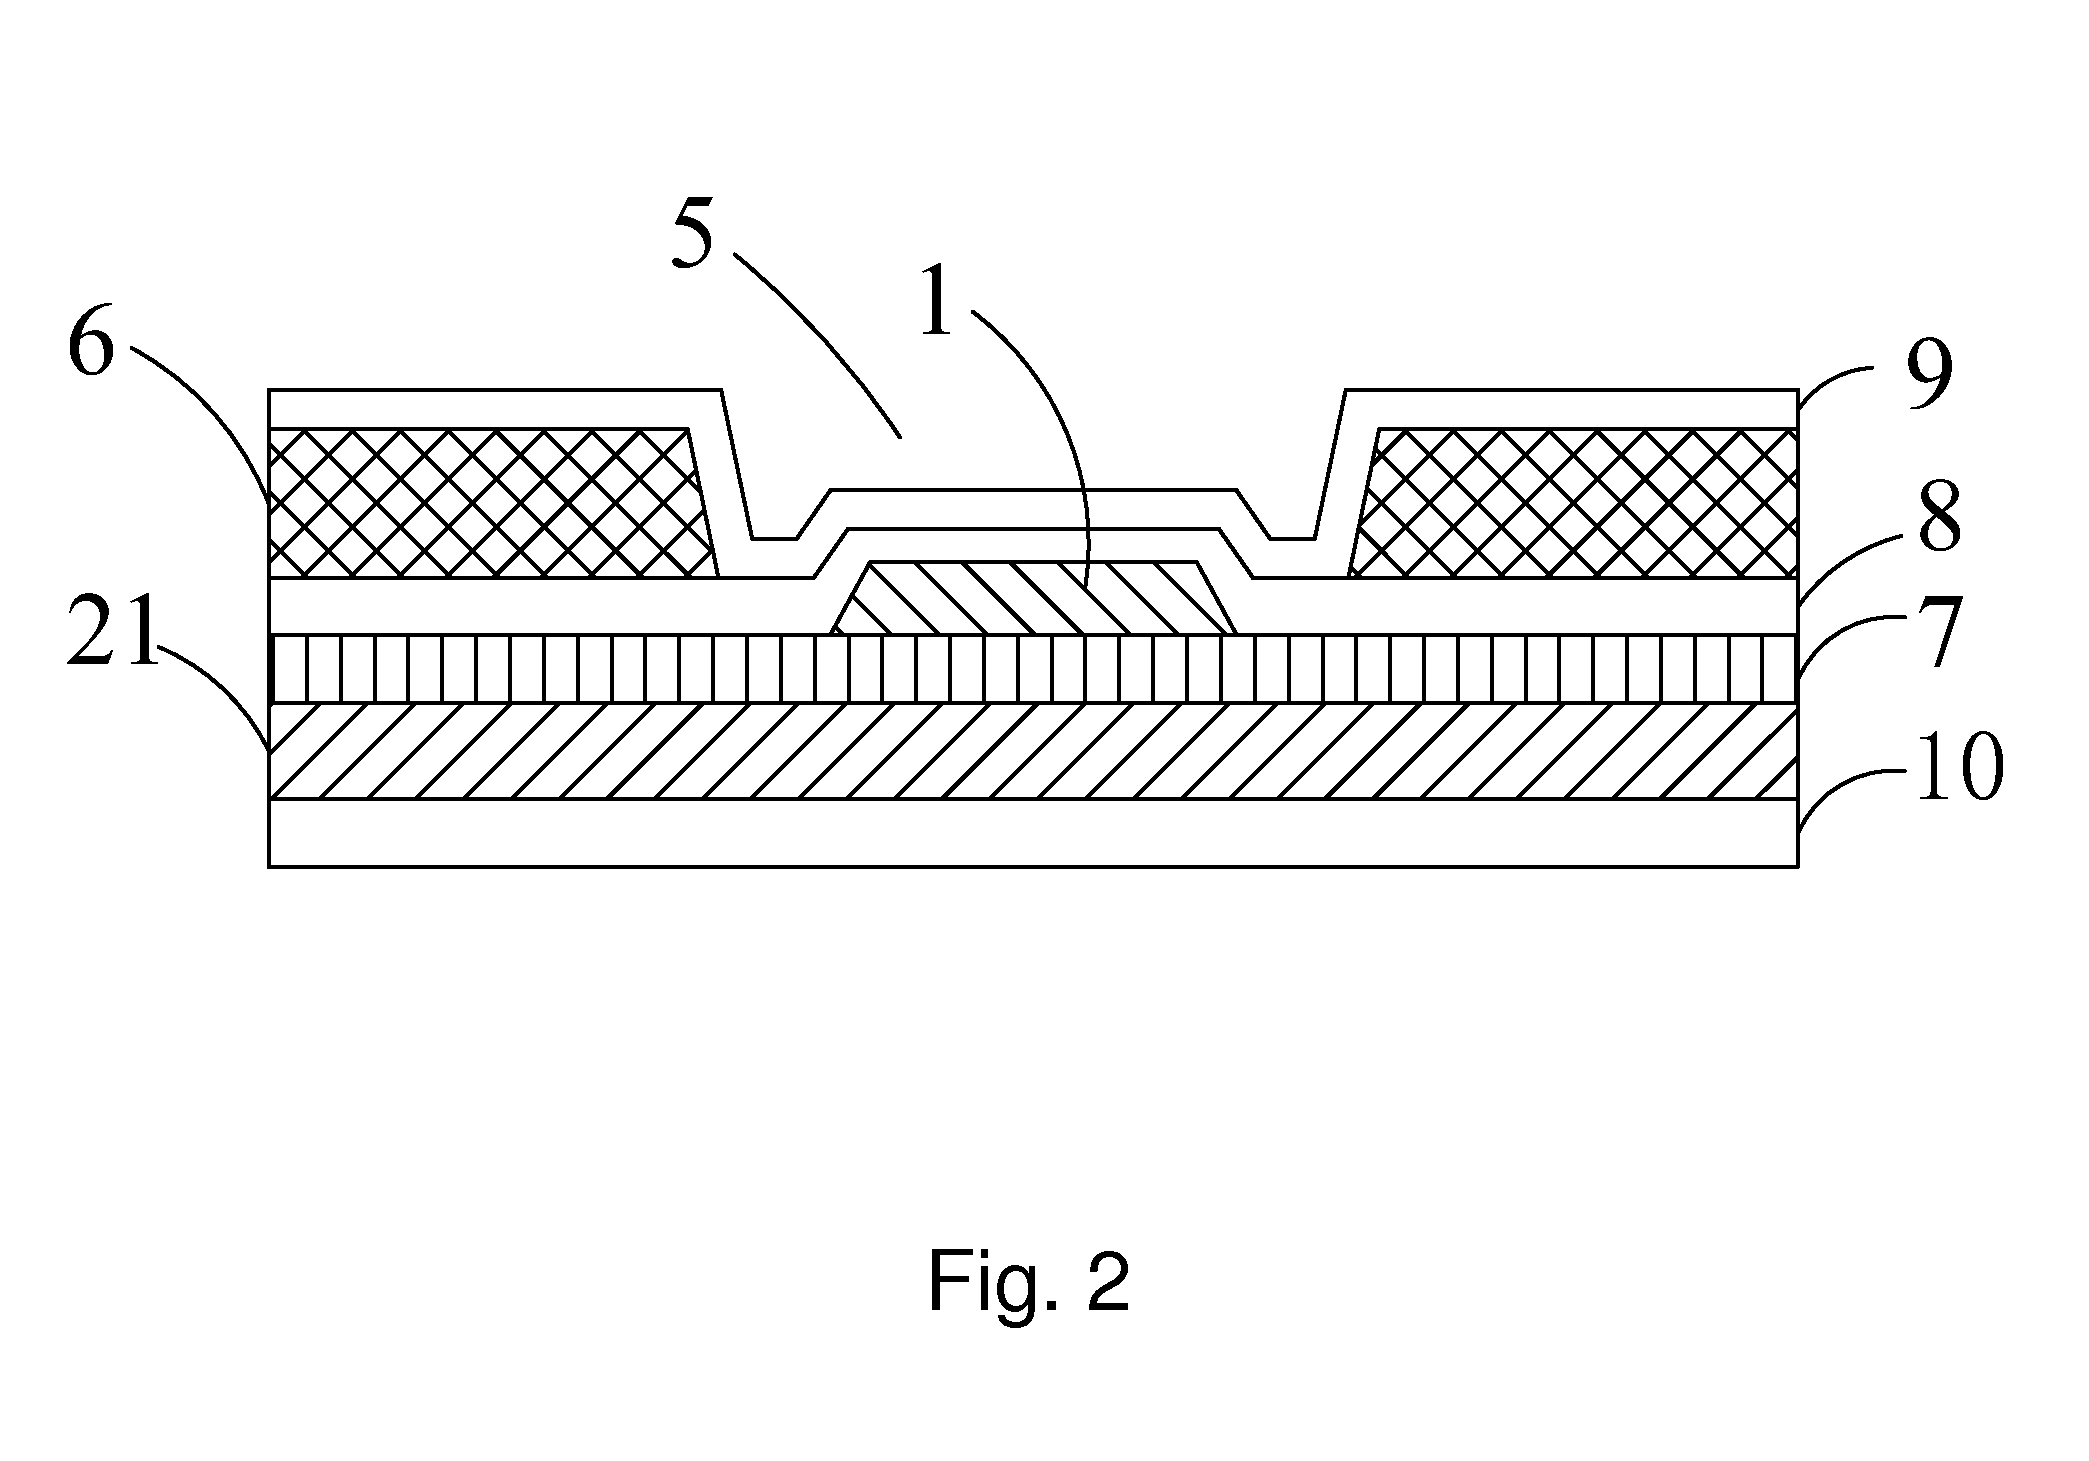 Array substrate and method of repairing broken lines for the array substrate